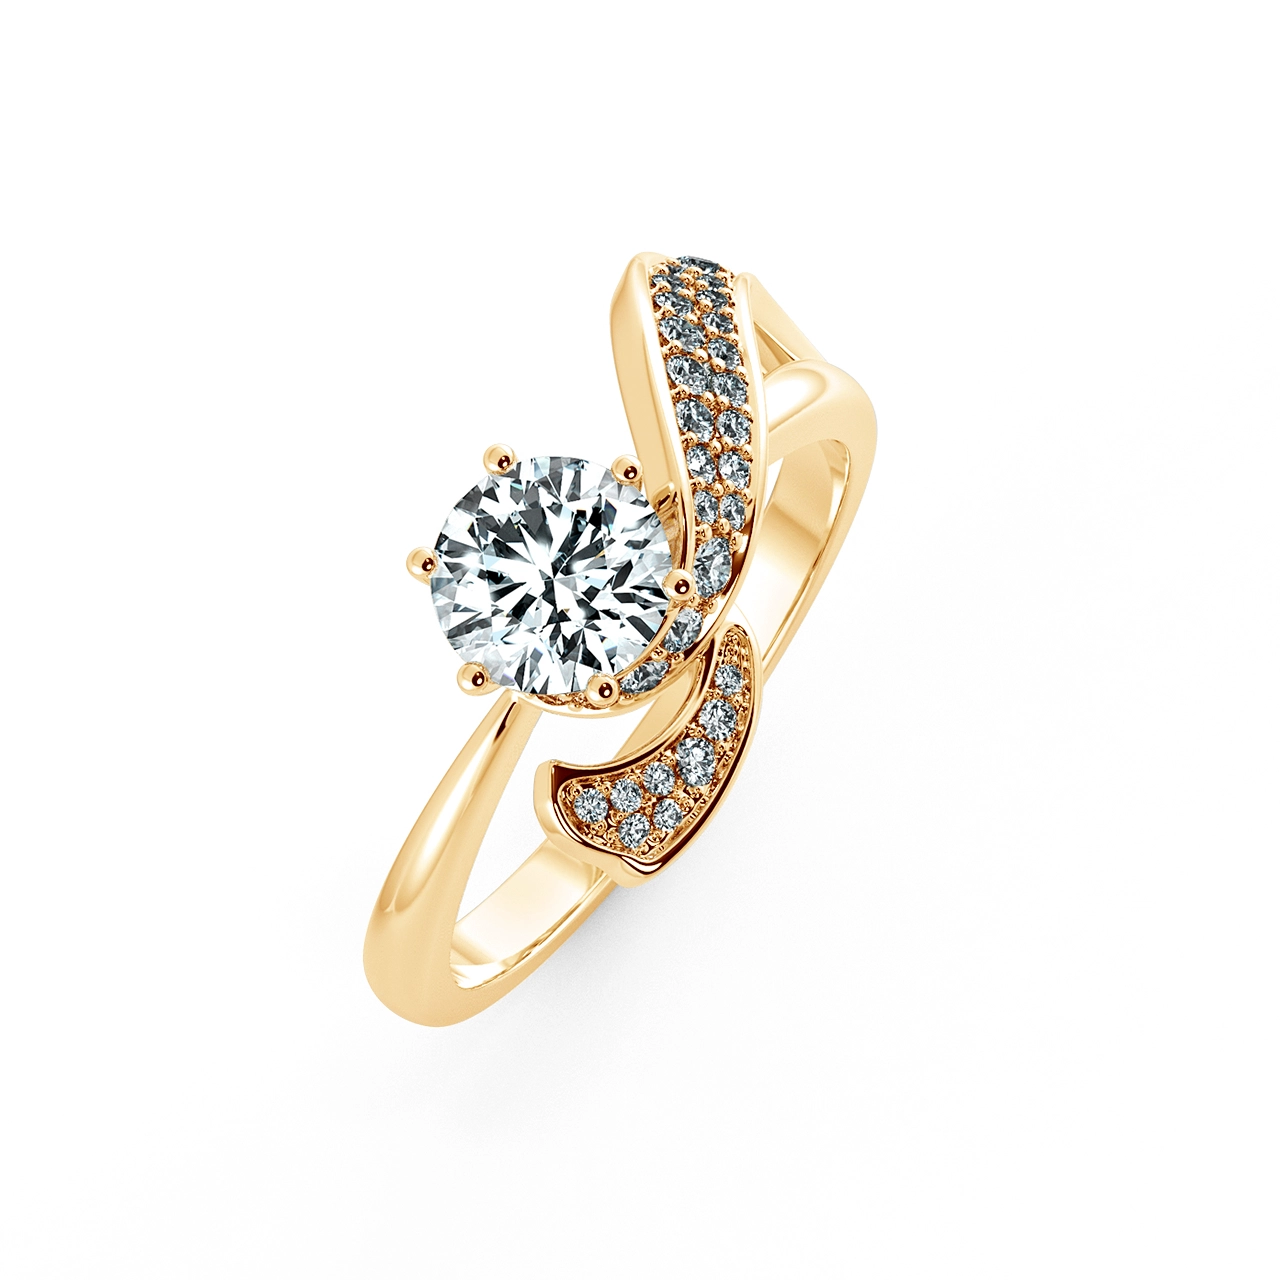 Solitaire Engagement Ring with Stylized Neck NCH1305 3